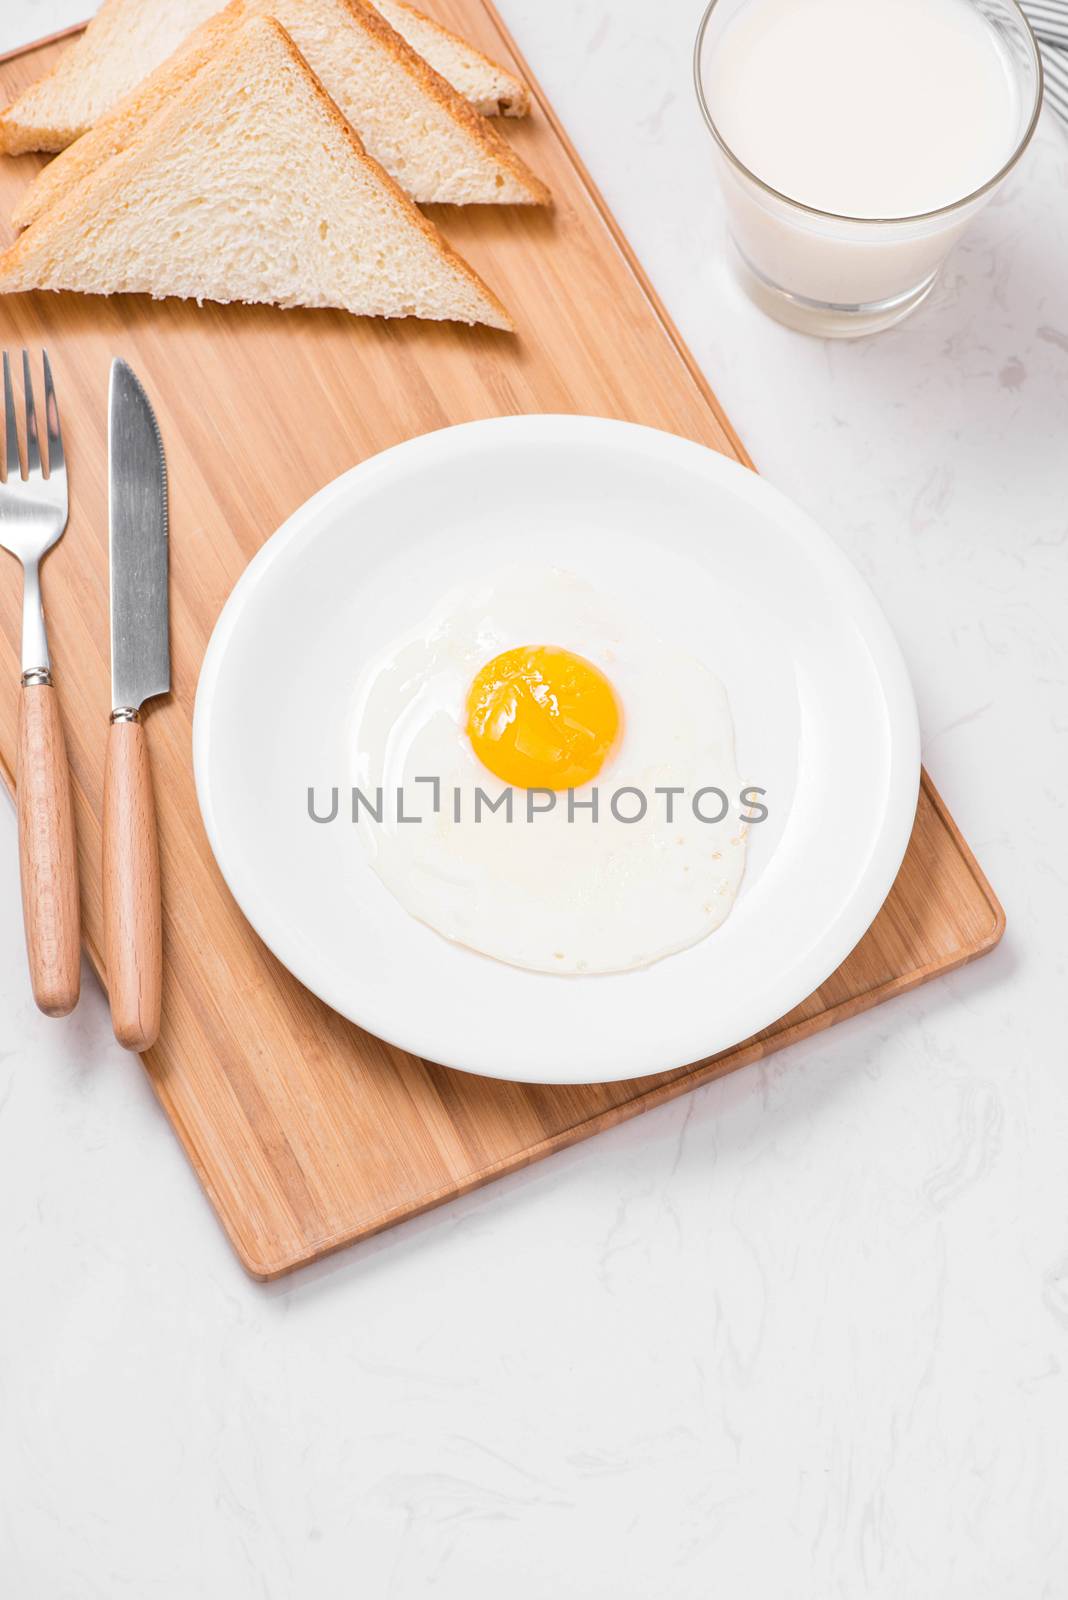 Top view of traditional healthy easy quick breakfast meal made of fried eggs served on a plate.